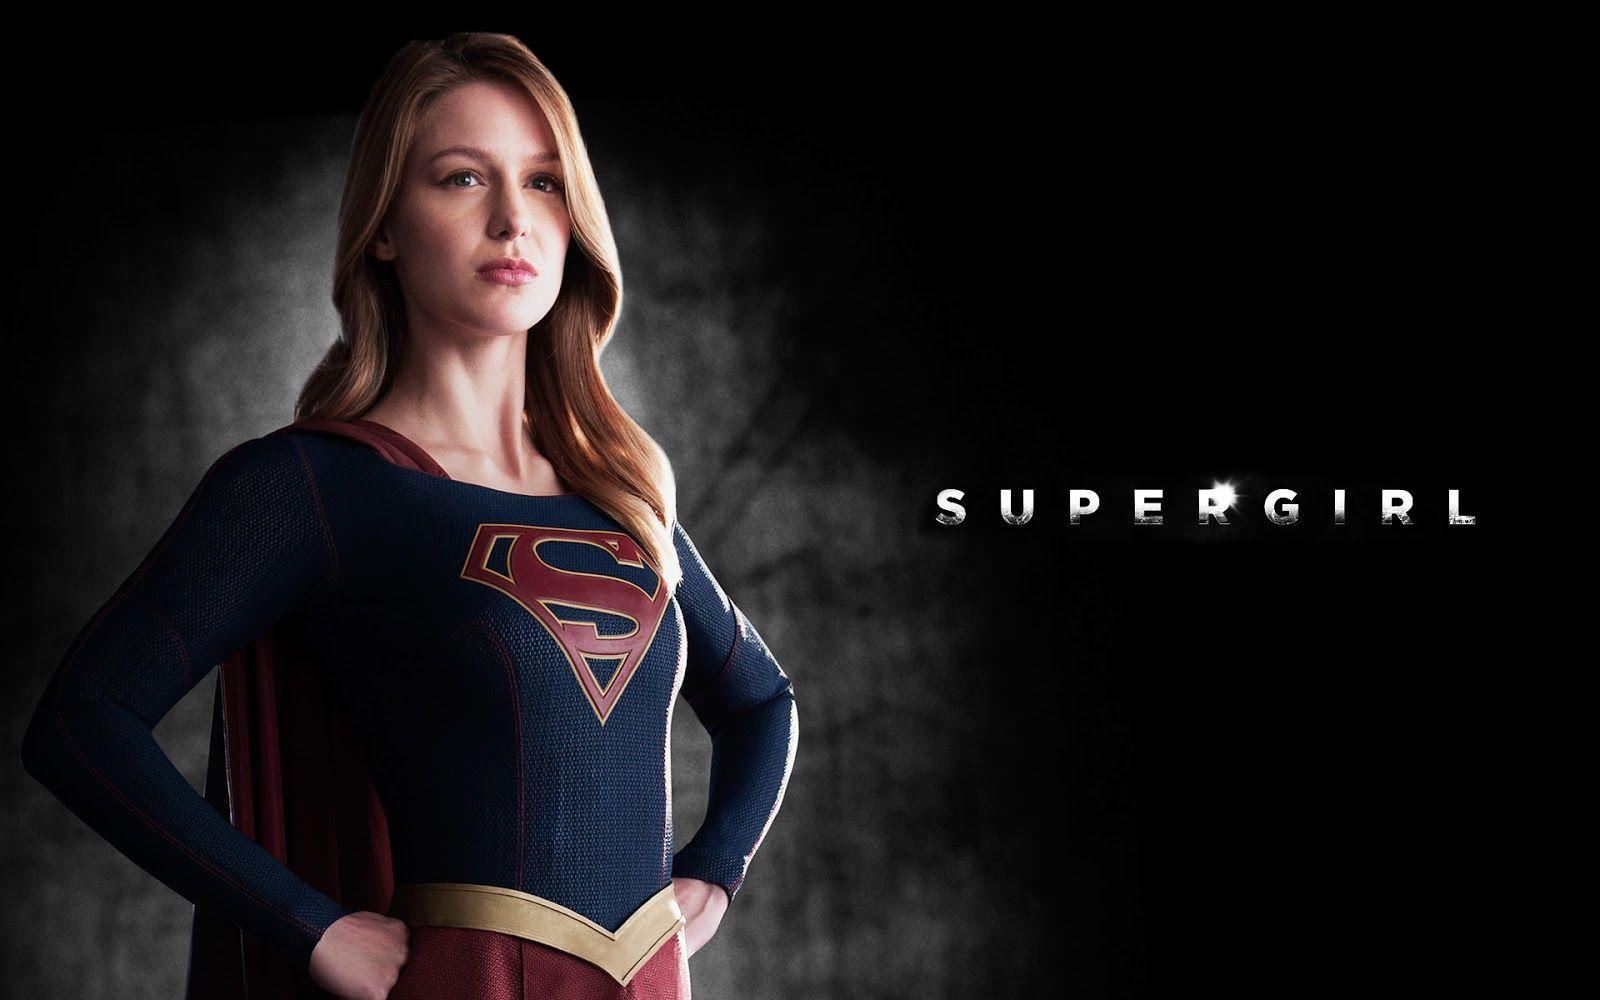 Supergirl Wallpaper HD 1920×1080 Supergirl Picture Wallpaper (45 Wallpaper). Adorable Wallpaper. Supergirl, Supergirl picture, Supergirl season